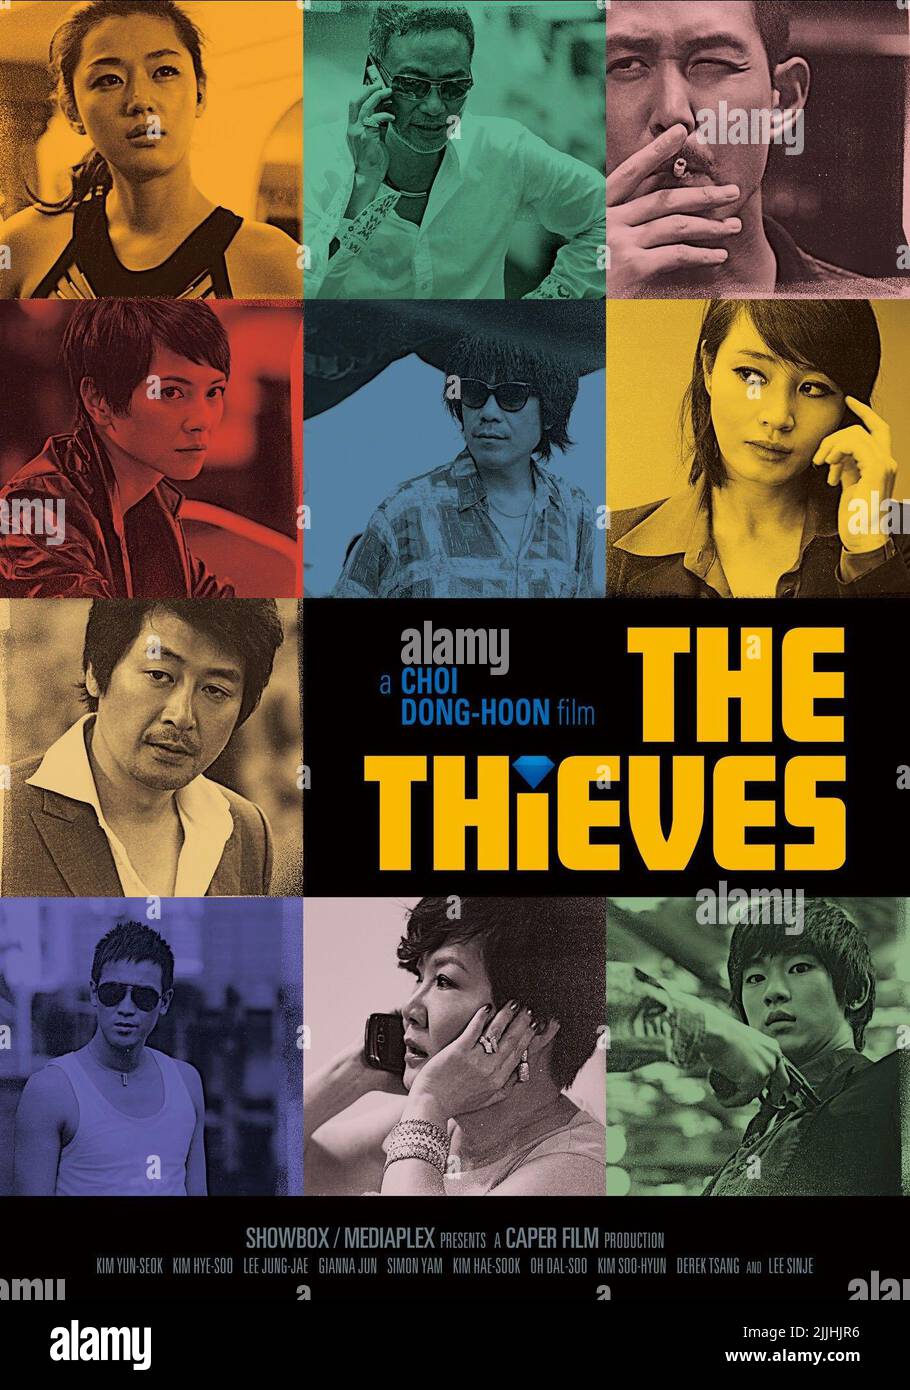 MOVIE POSTER, THE THIEVES, 2012 Stock Photo